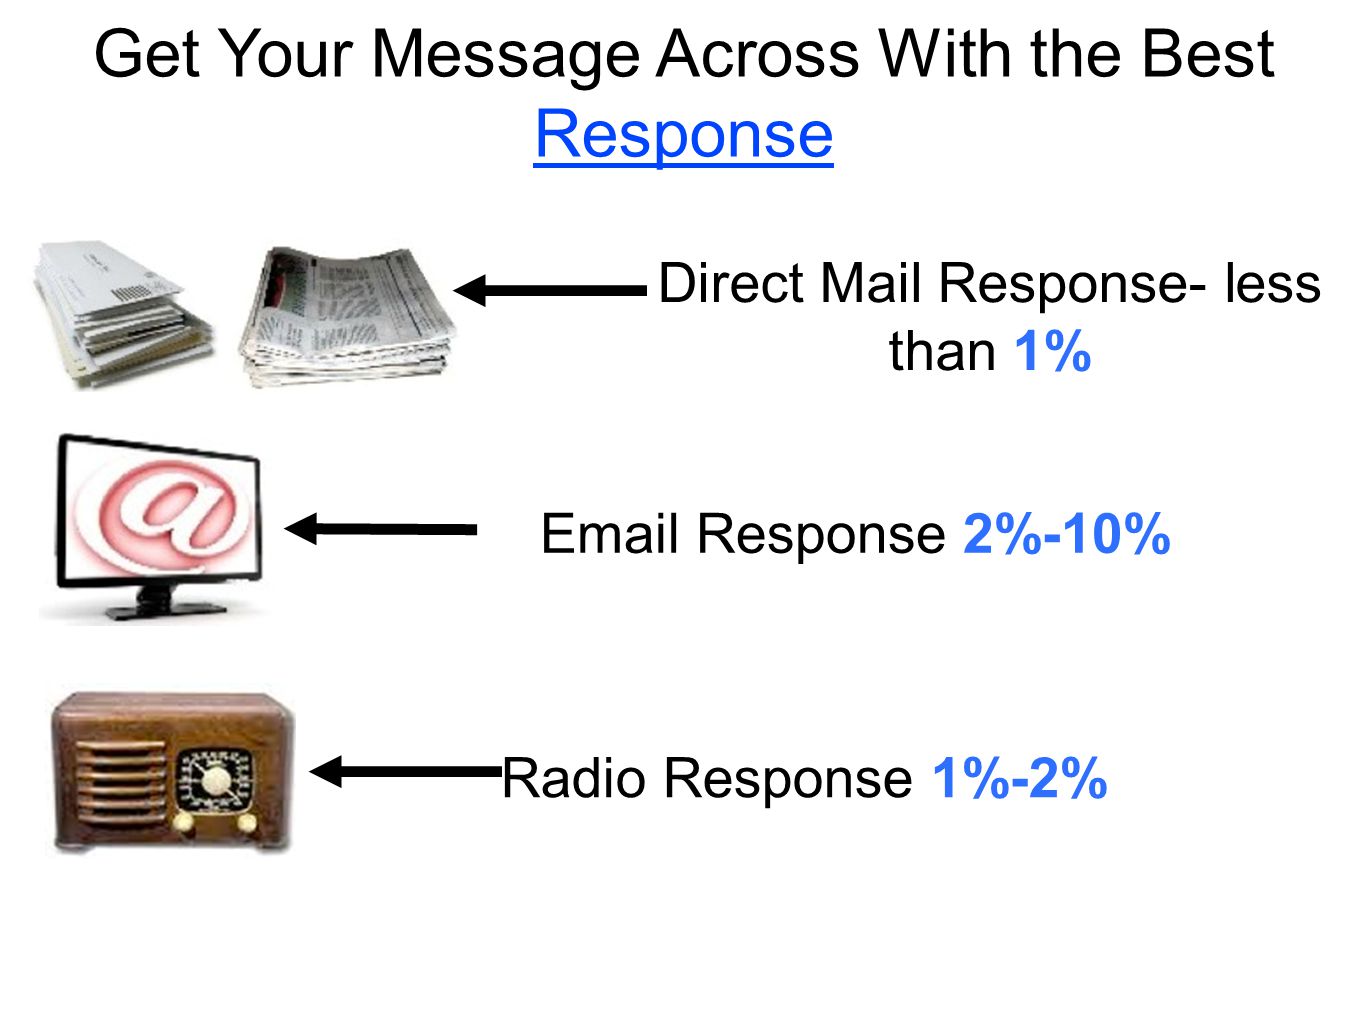 Get Your Message Across With the Best Response Direct Mail Response- less than 1%  Response 2%-10% Radio Response 1%-2%